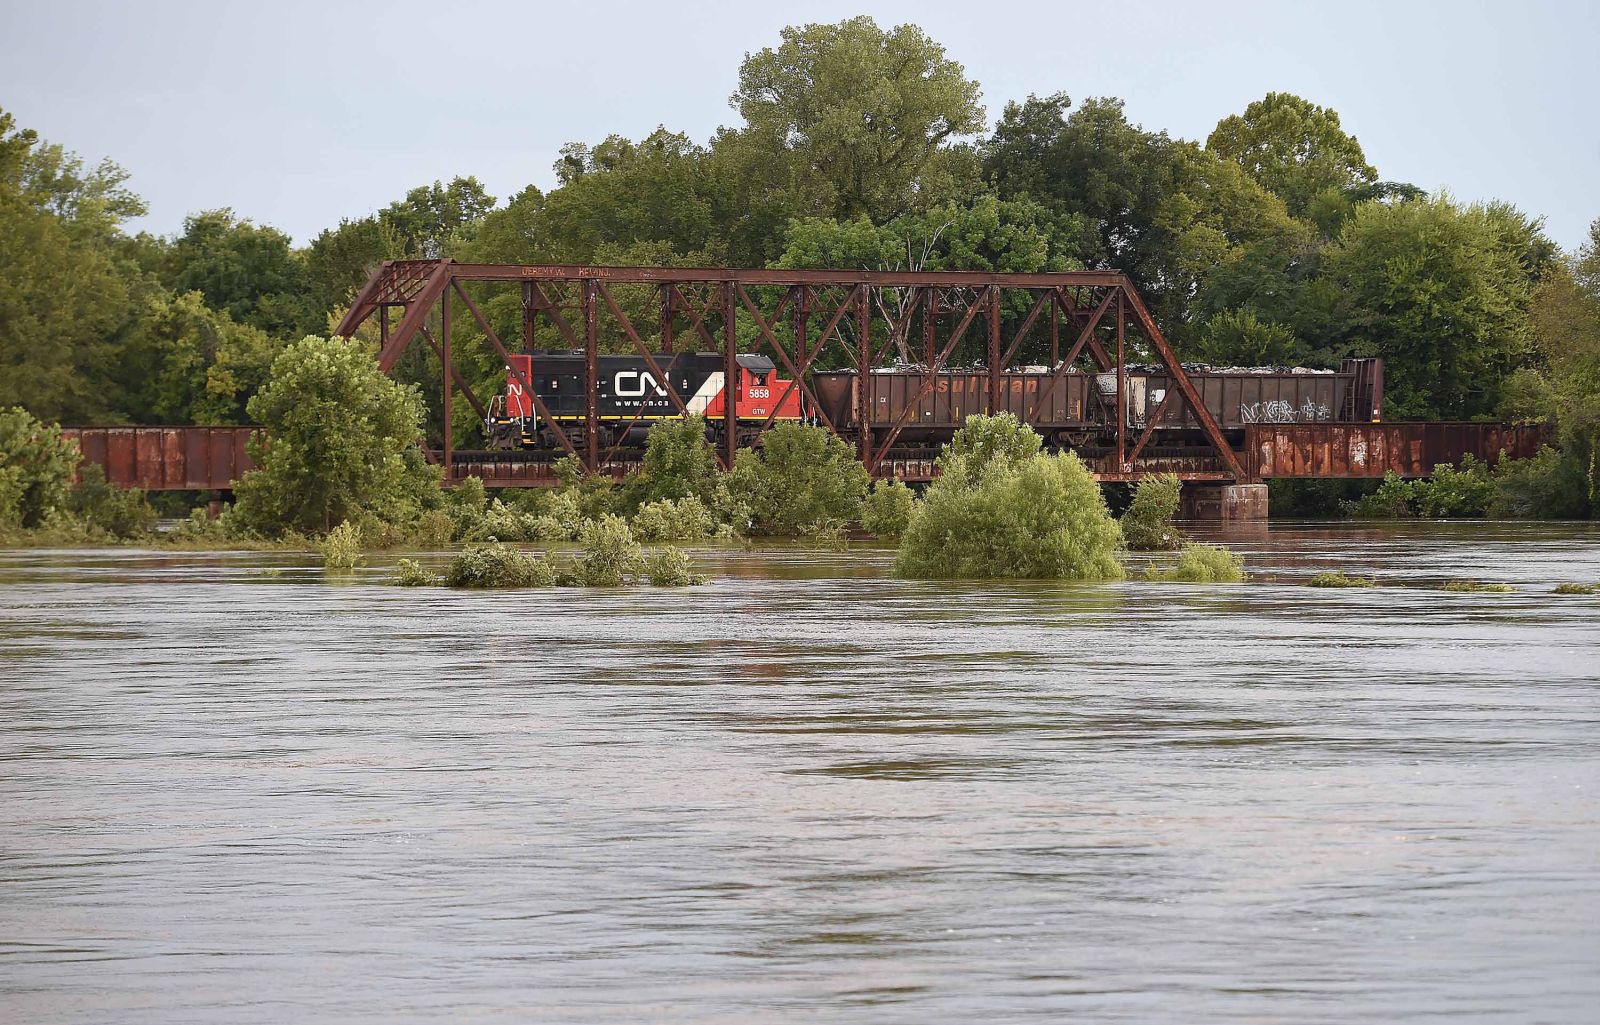 epa10148788 A freight train crosses the Pearl River in Jackson, Mississippi, USA, 30 April 2022. Flood waters from the Pearl River have flooded areas of Jackson and damaged the city's primary water treatment facility. According to reports as many as 180,000 residents are without running water for cleaning, cooking, drinking and flushing toilets.  EPA/CHRIS TODD